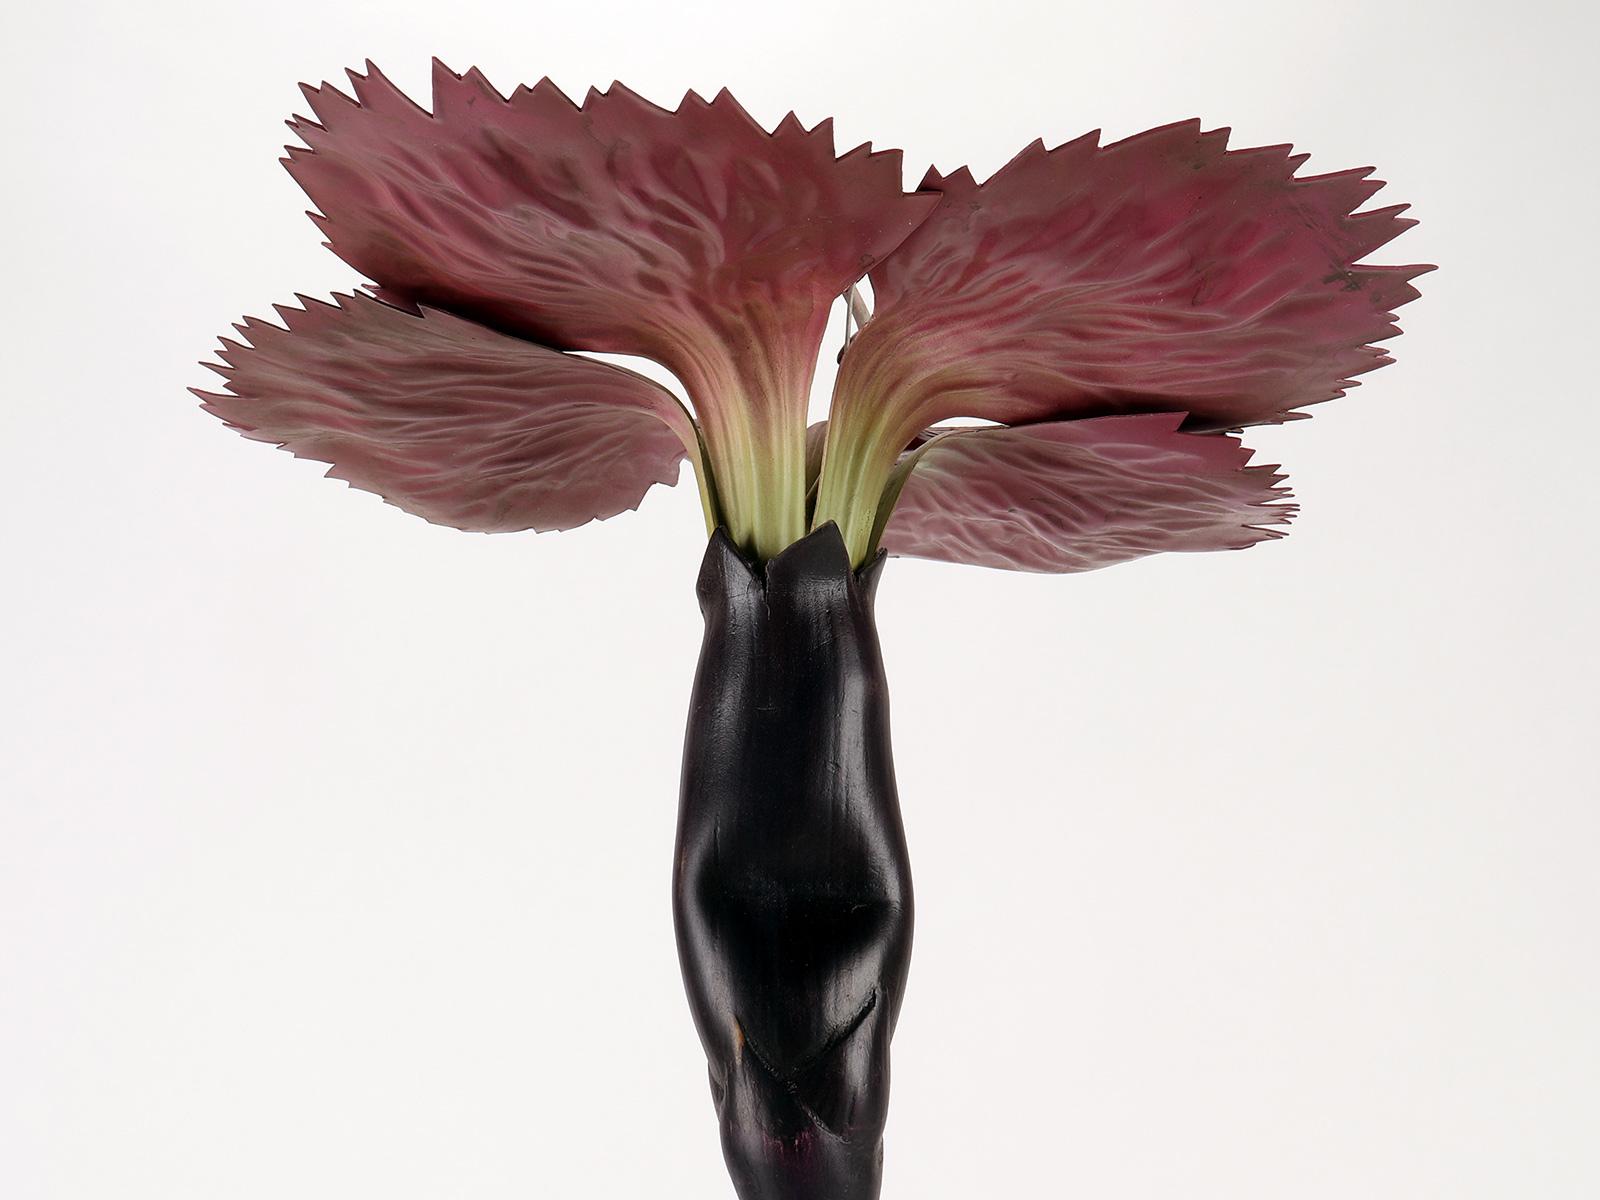 20th Century Botanic Model of a Carnation Flower, Paravia Italy, 1940 For Sale